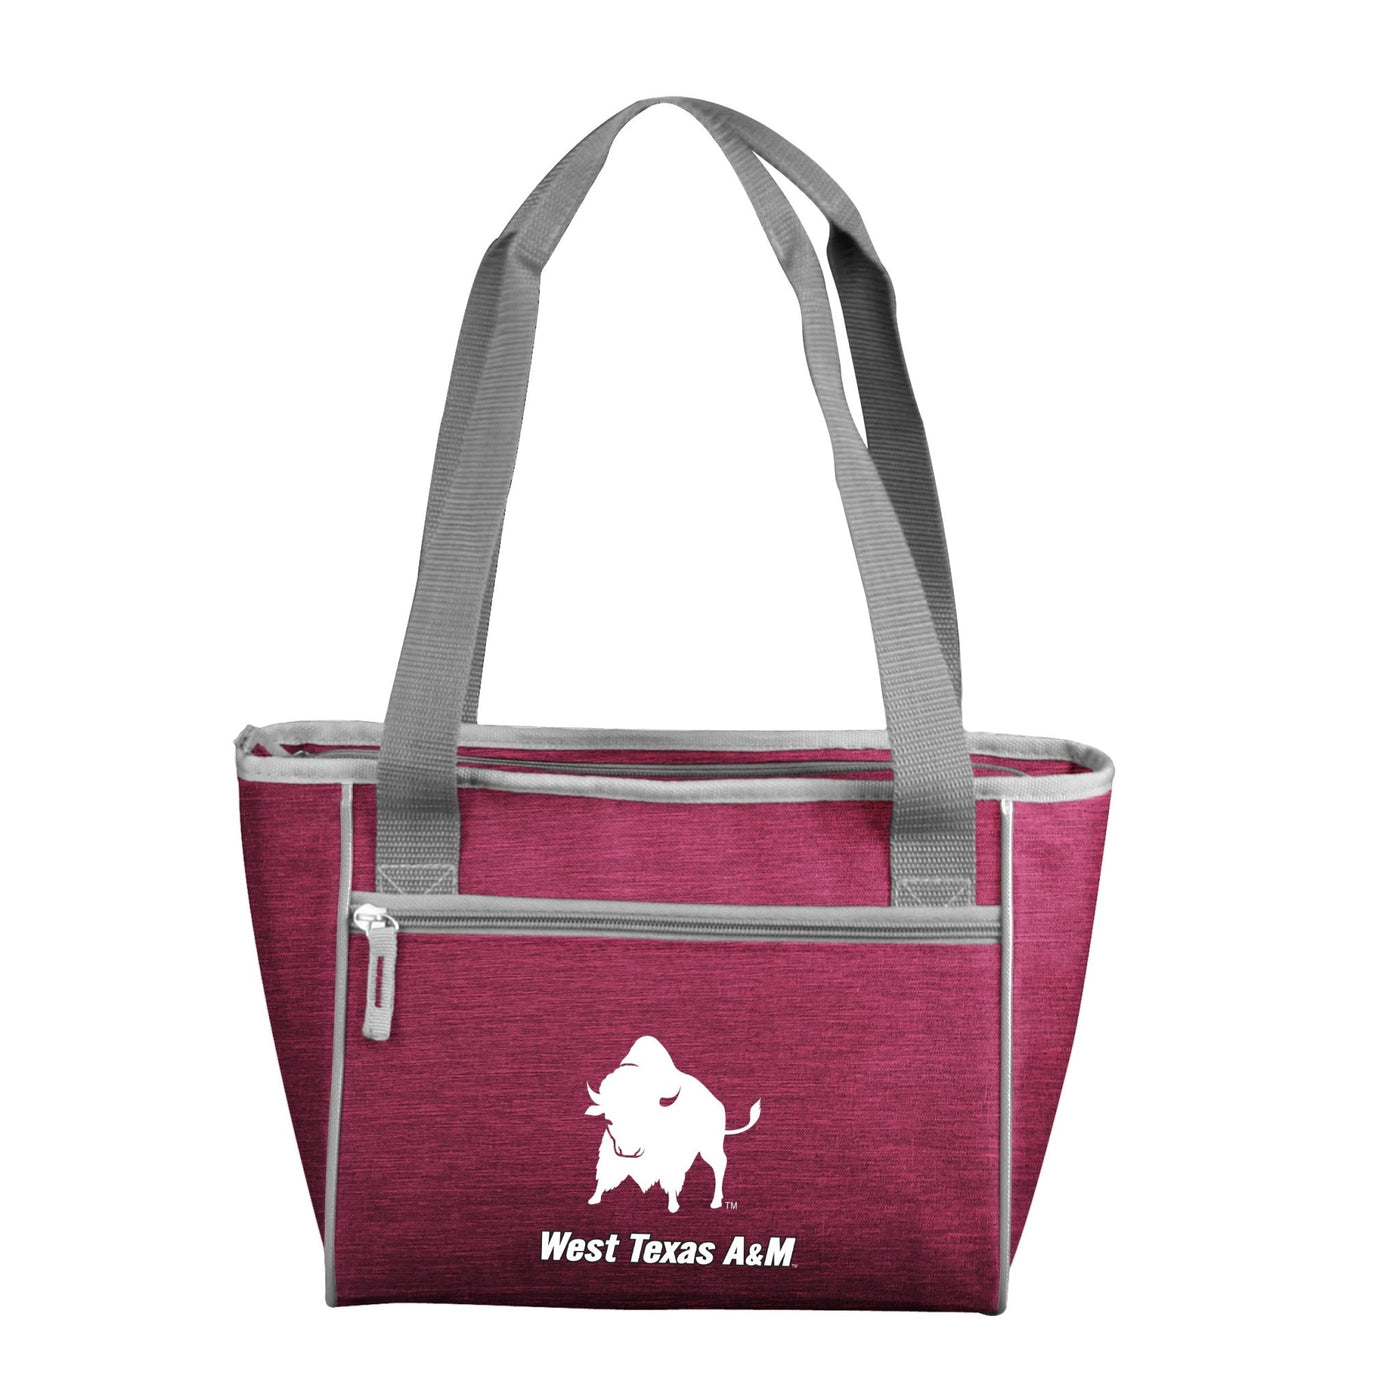 West TX A&M Crosshatch 16 Can Cooler Tote - Logo Brands